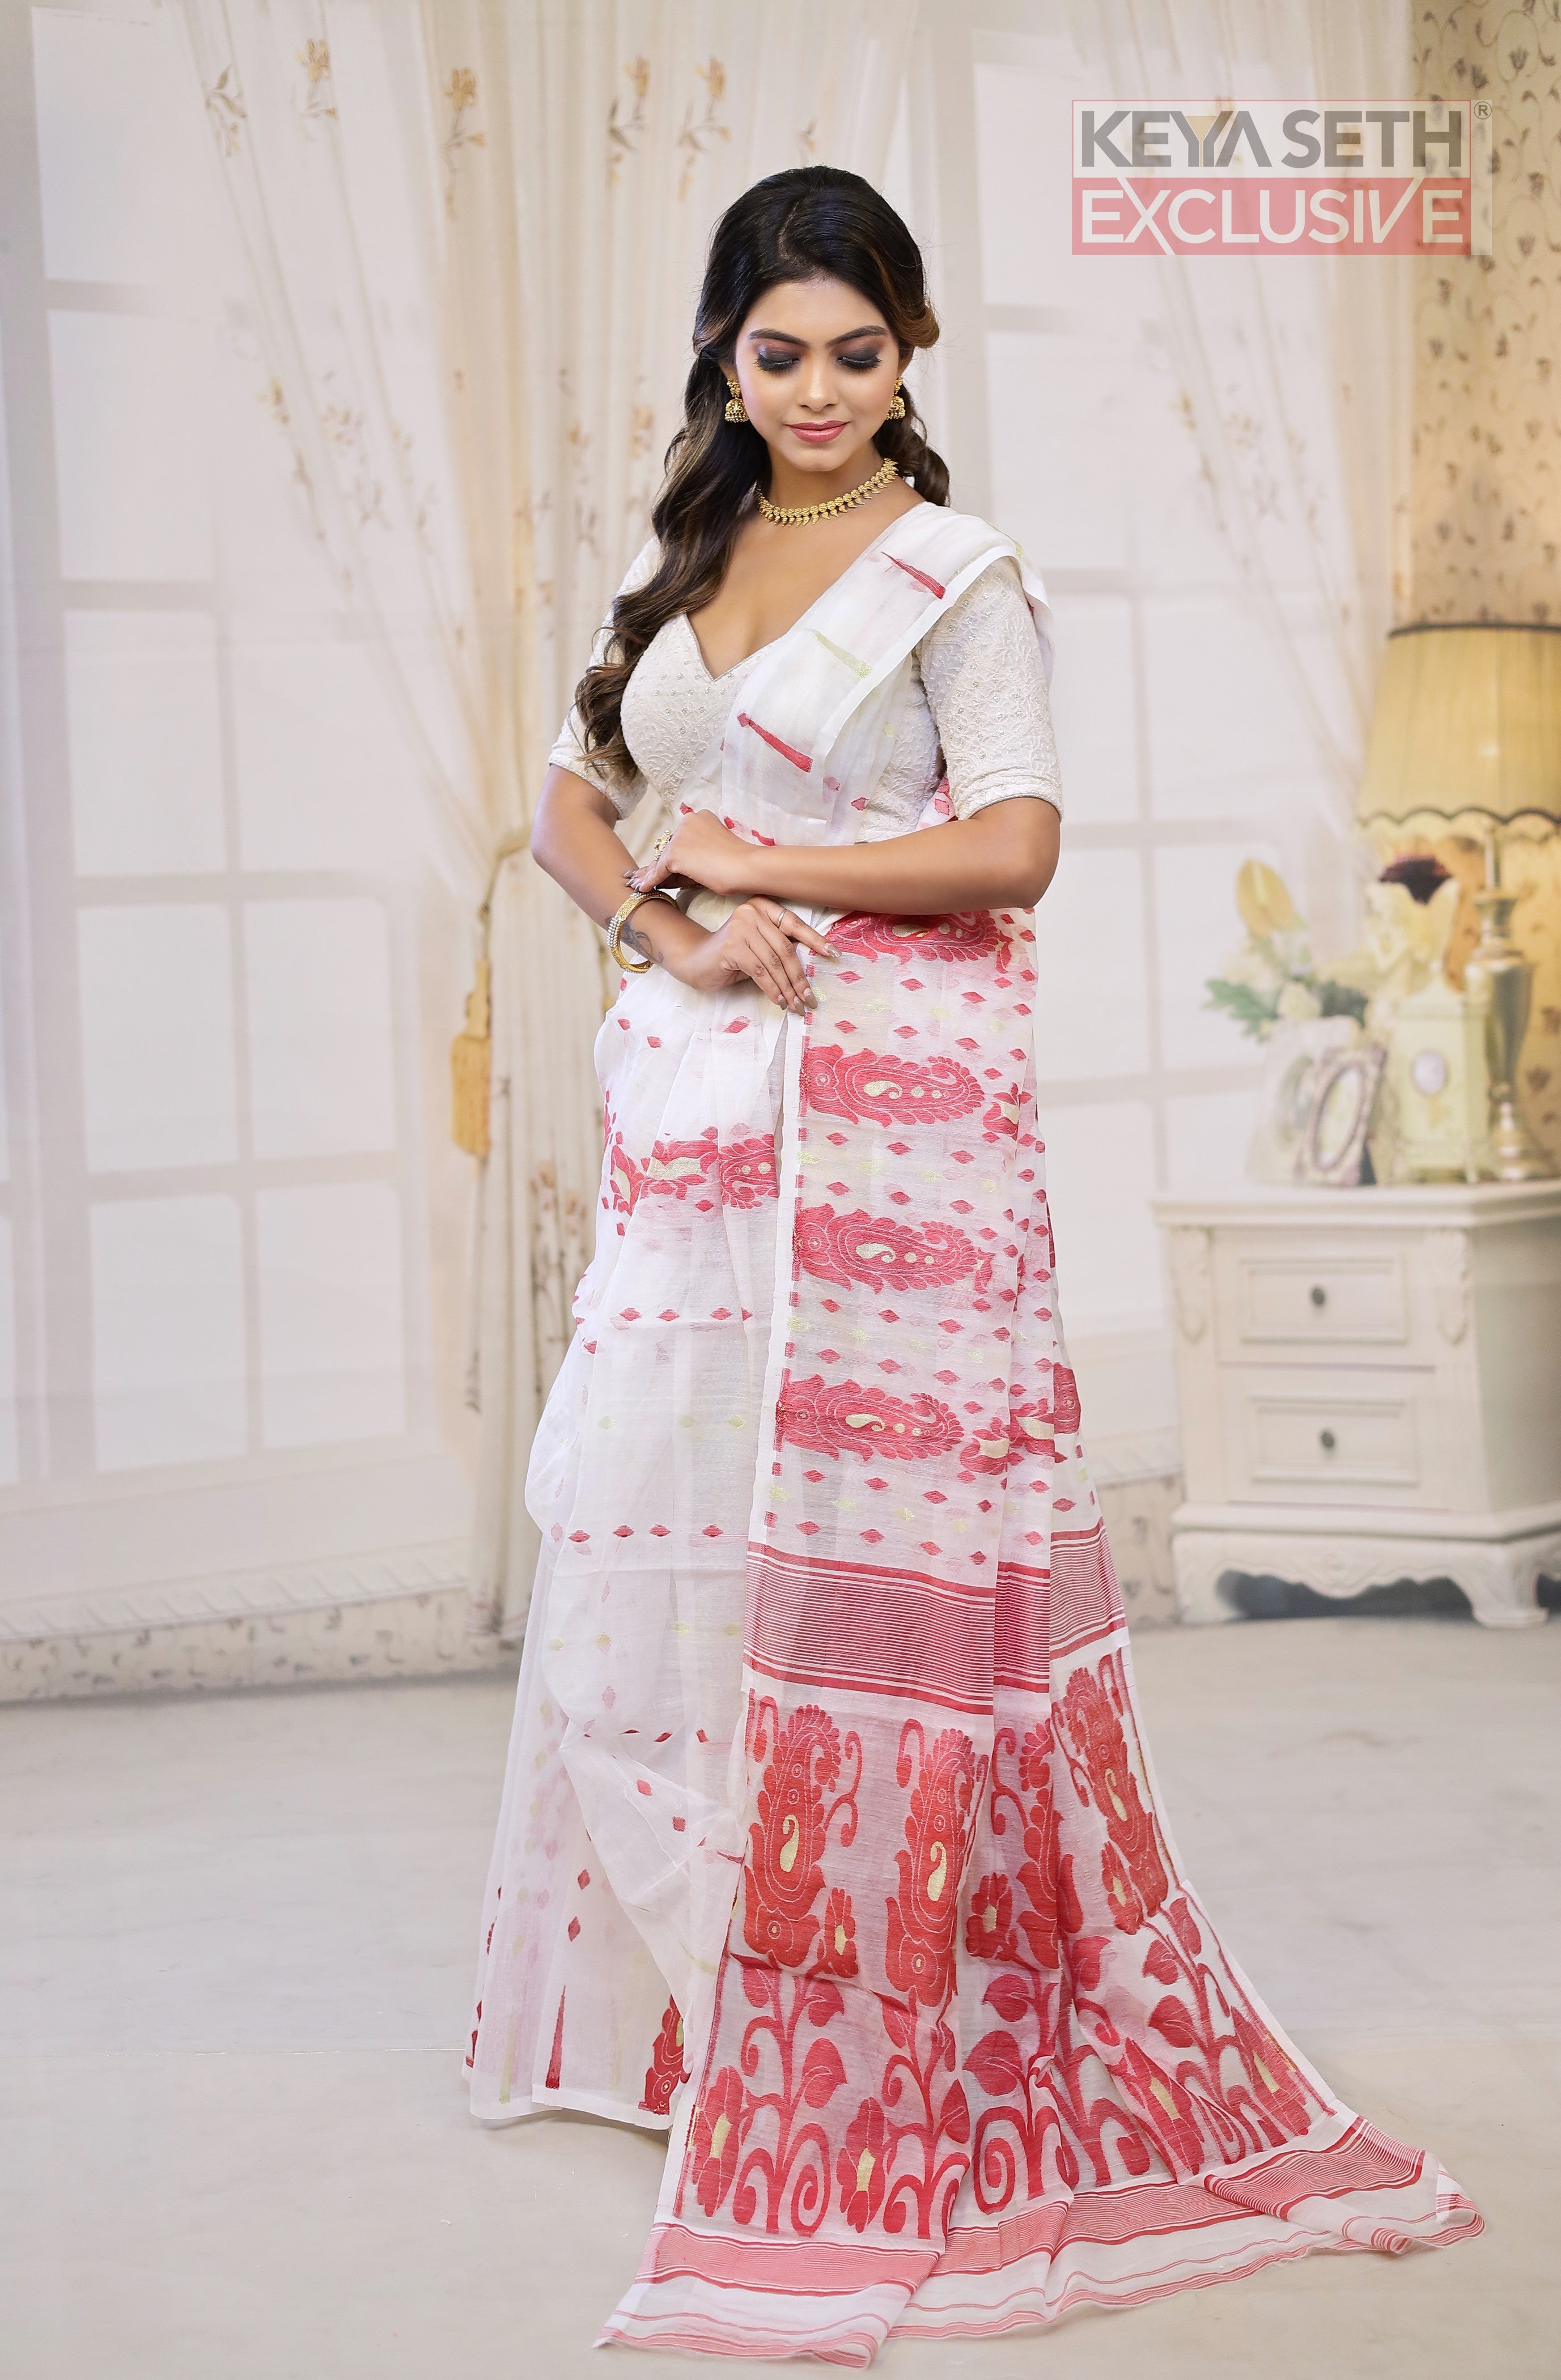 Keya Seth Exclusive - A lot to shop before wedding but running out of time?  Do not let time scarcity ruin your wedding shopping. Keya Seth Exclusive  has launched Exclusive Wedding Packages